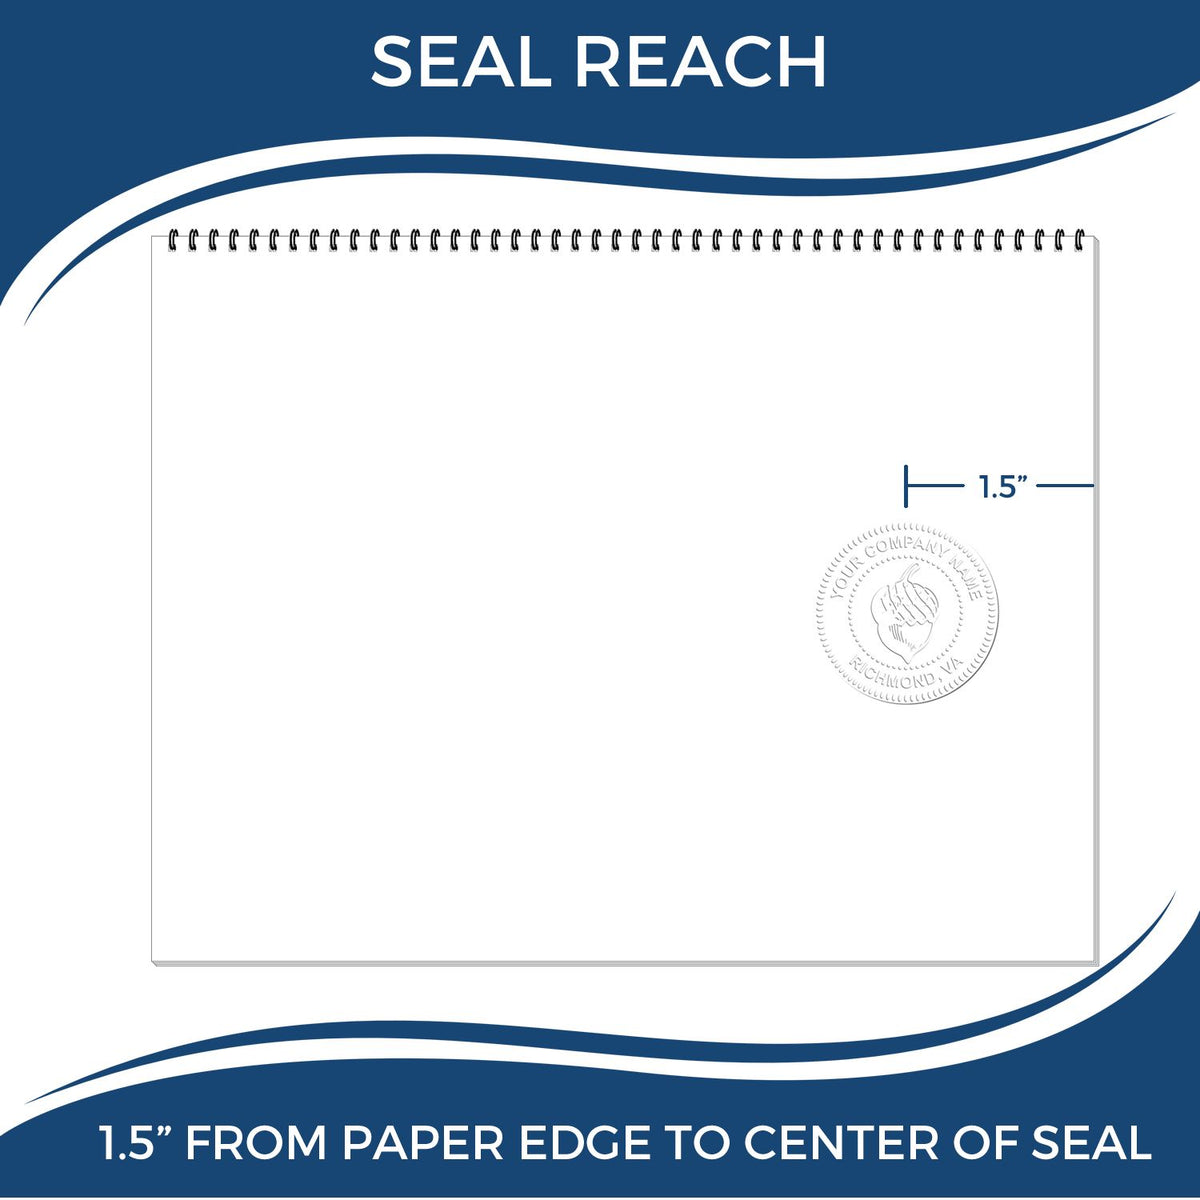 An infographic showing the seal reach which is represented by a ruler and a miniature seal image of the Soft Iowa Professional Engineer Seal